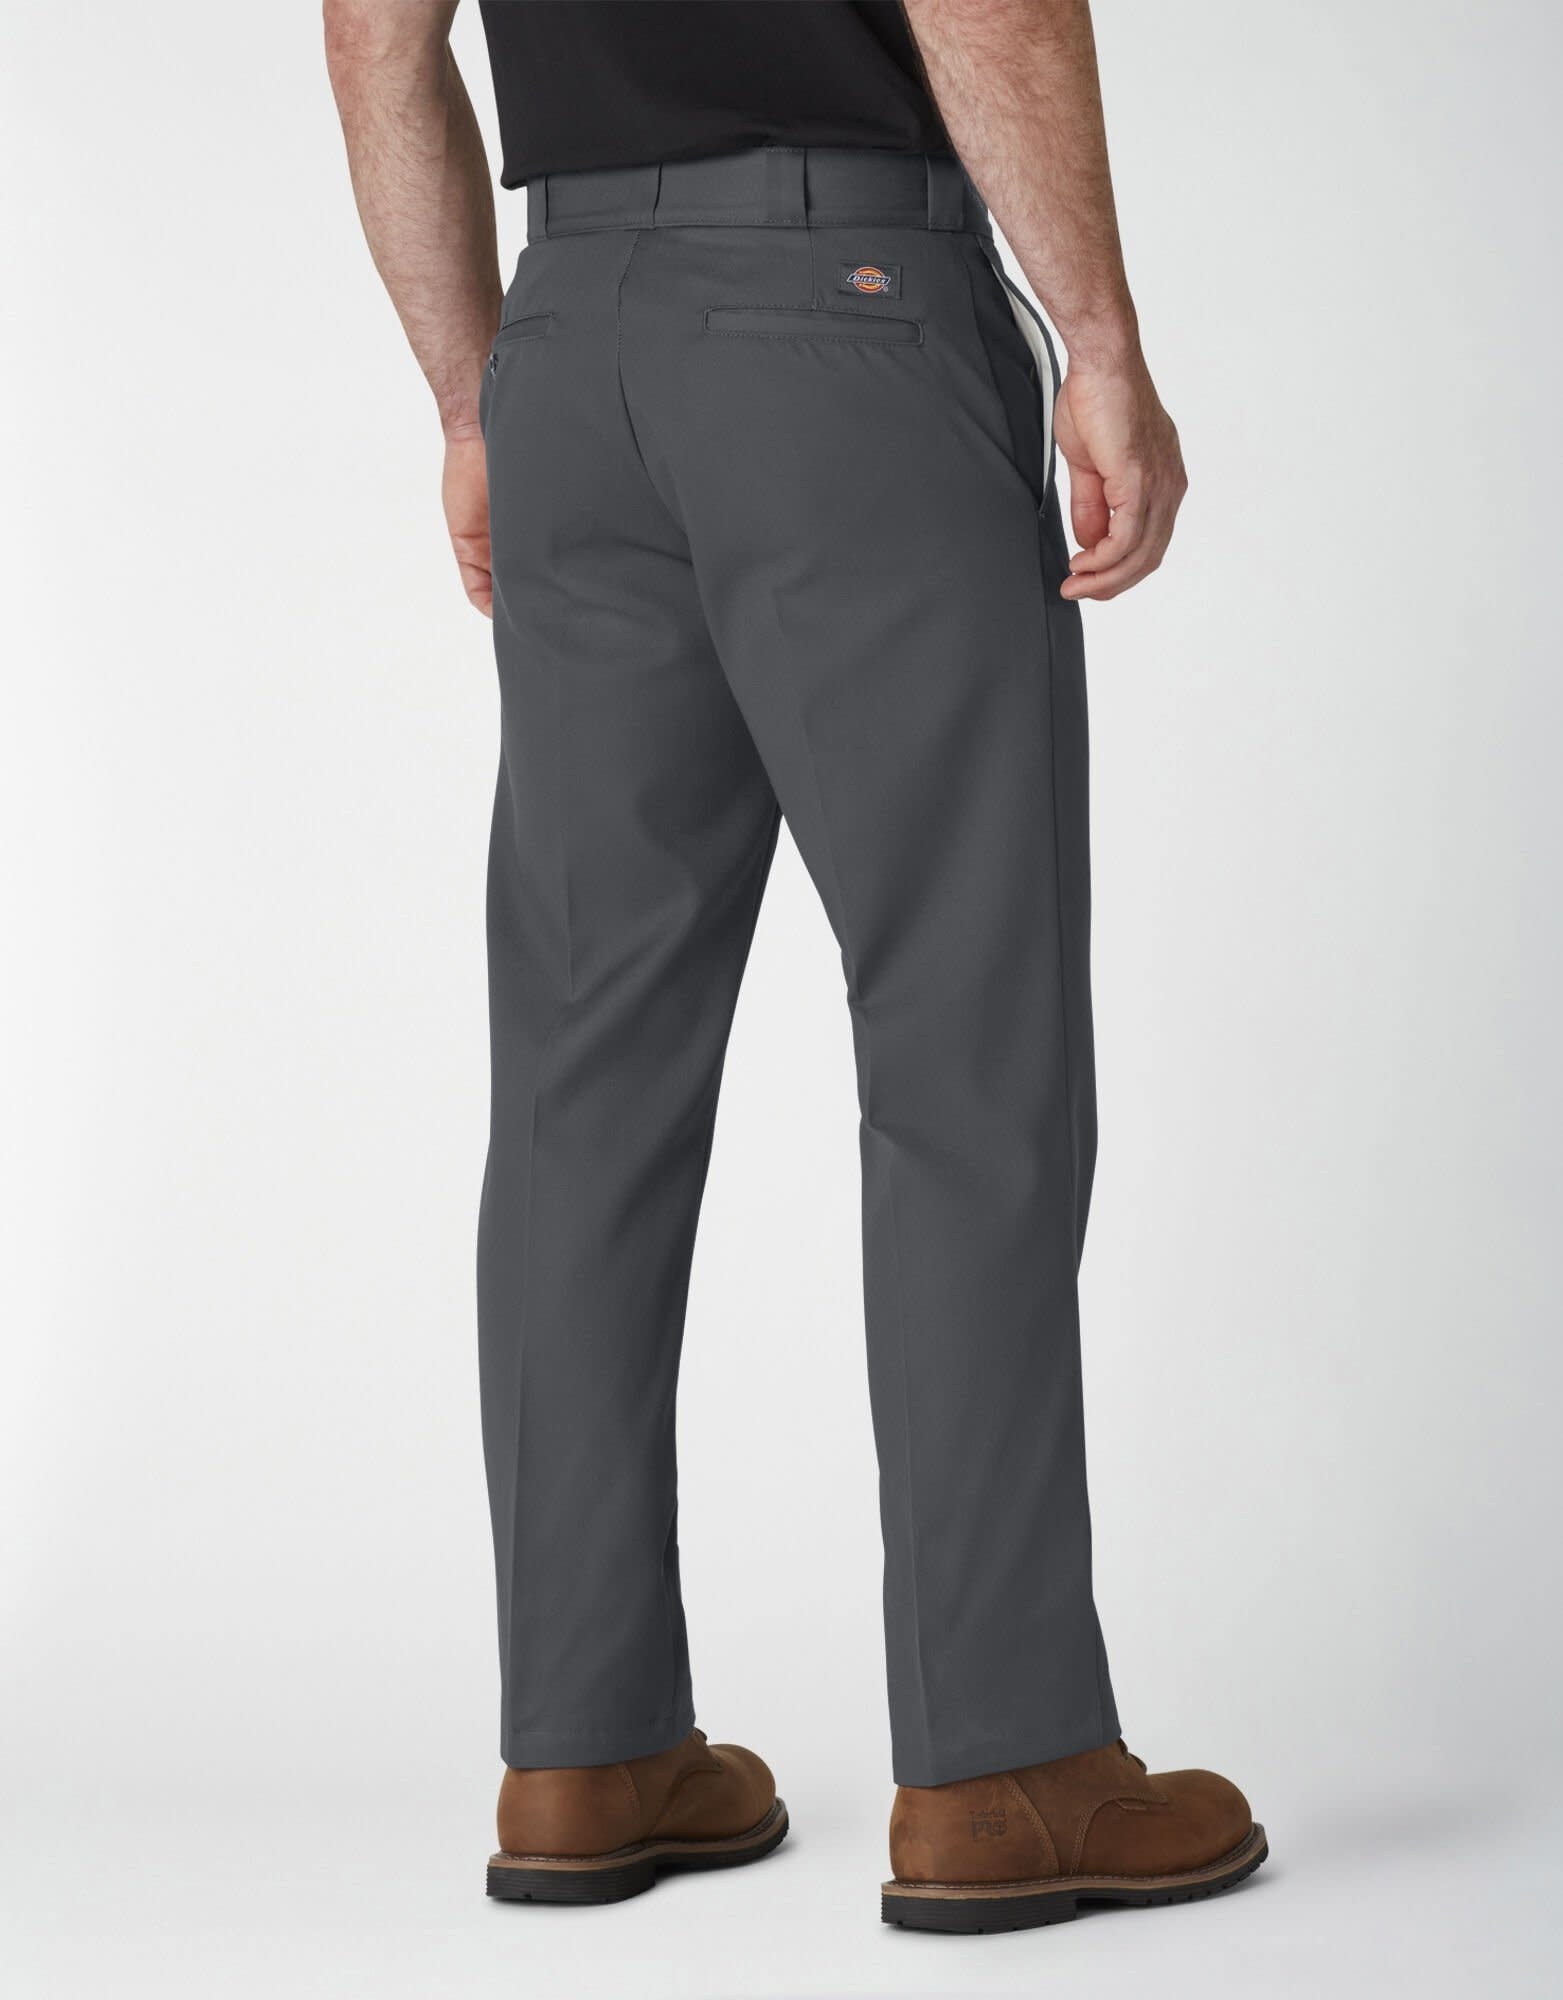 Dickies 874 Work Pants Relaxed Fit (Charcoal Grey) – Shredz Shop Skate